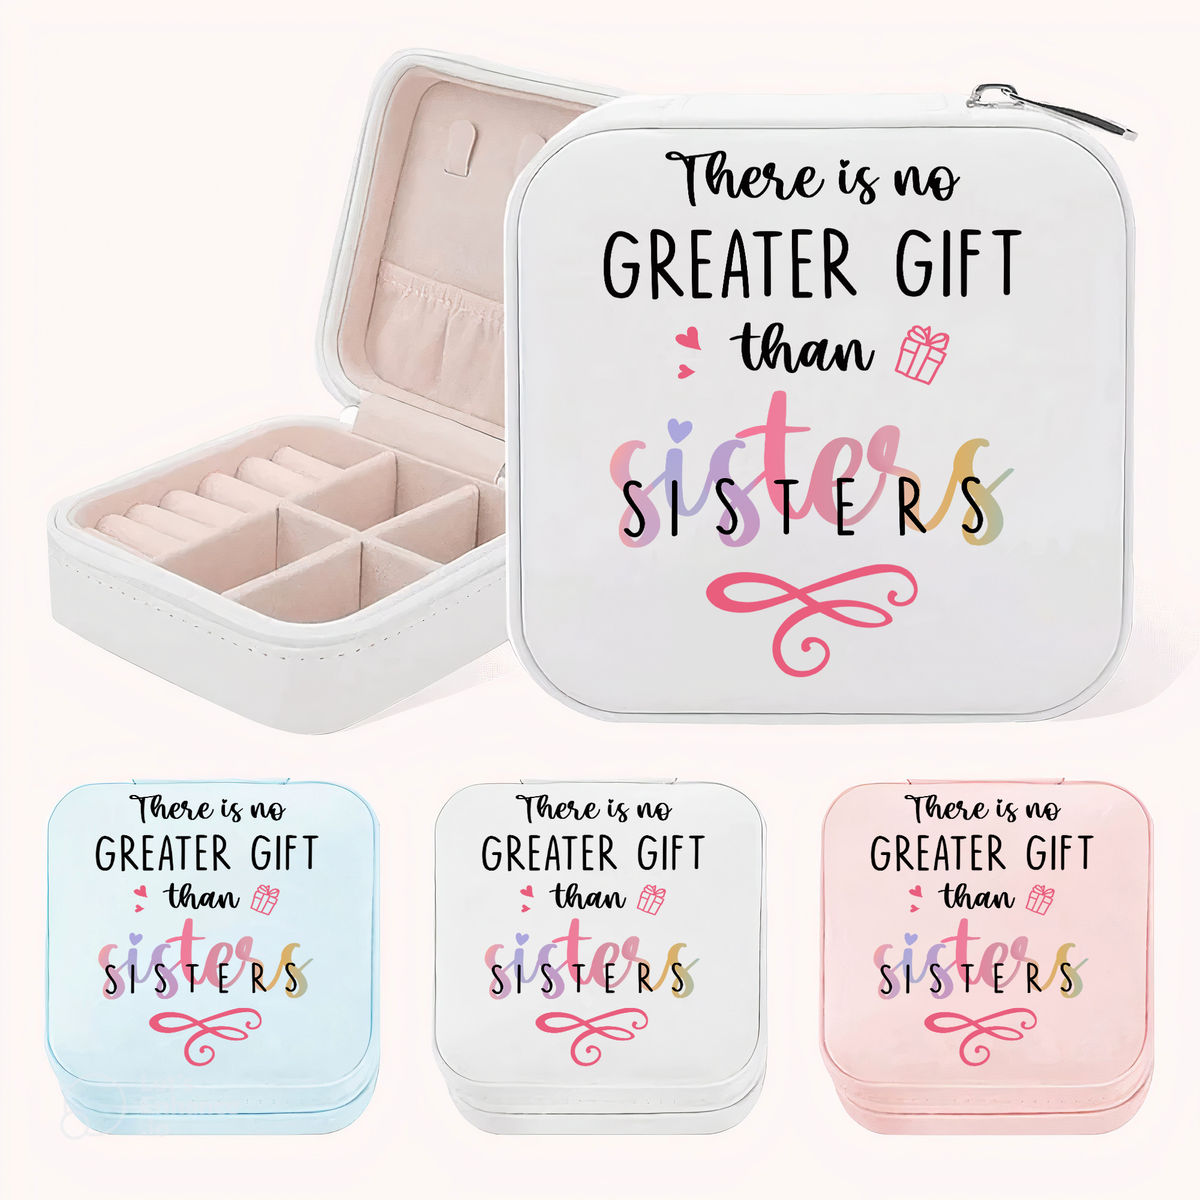 Box - Travel Jewelry Box - There is no greater gift than sister - Gifts For Best Friends, Sisters, Birthday Gifts For Friends_1